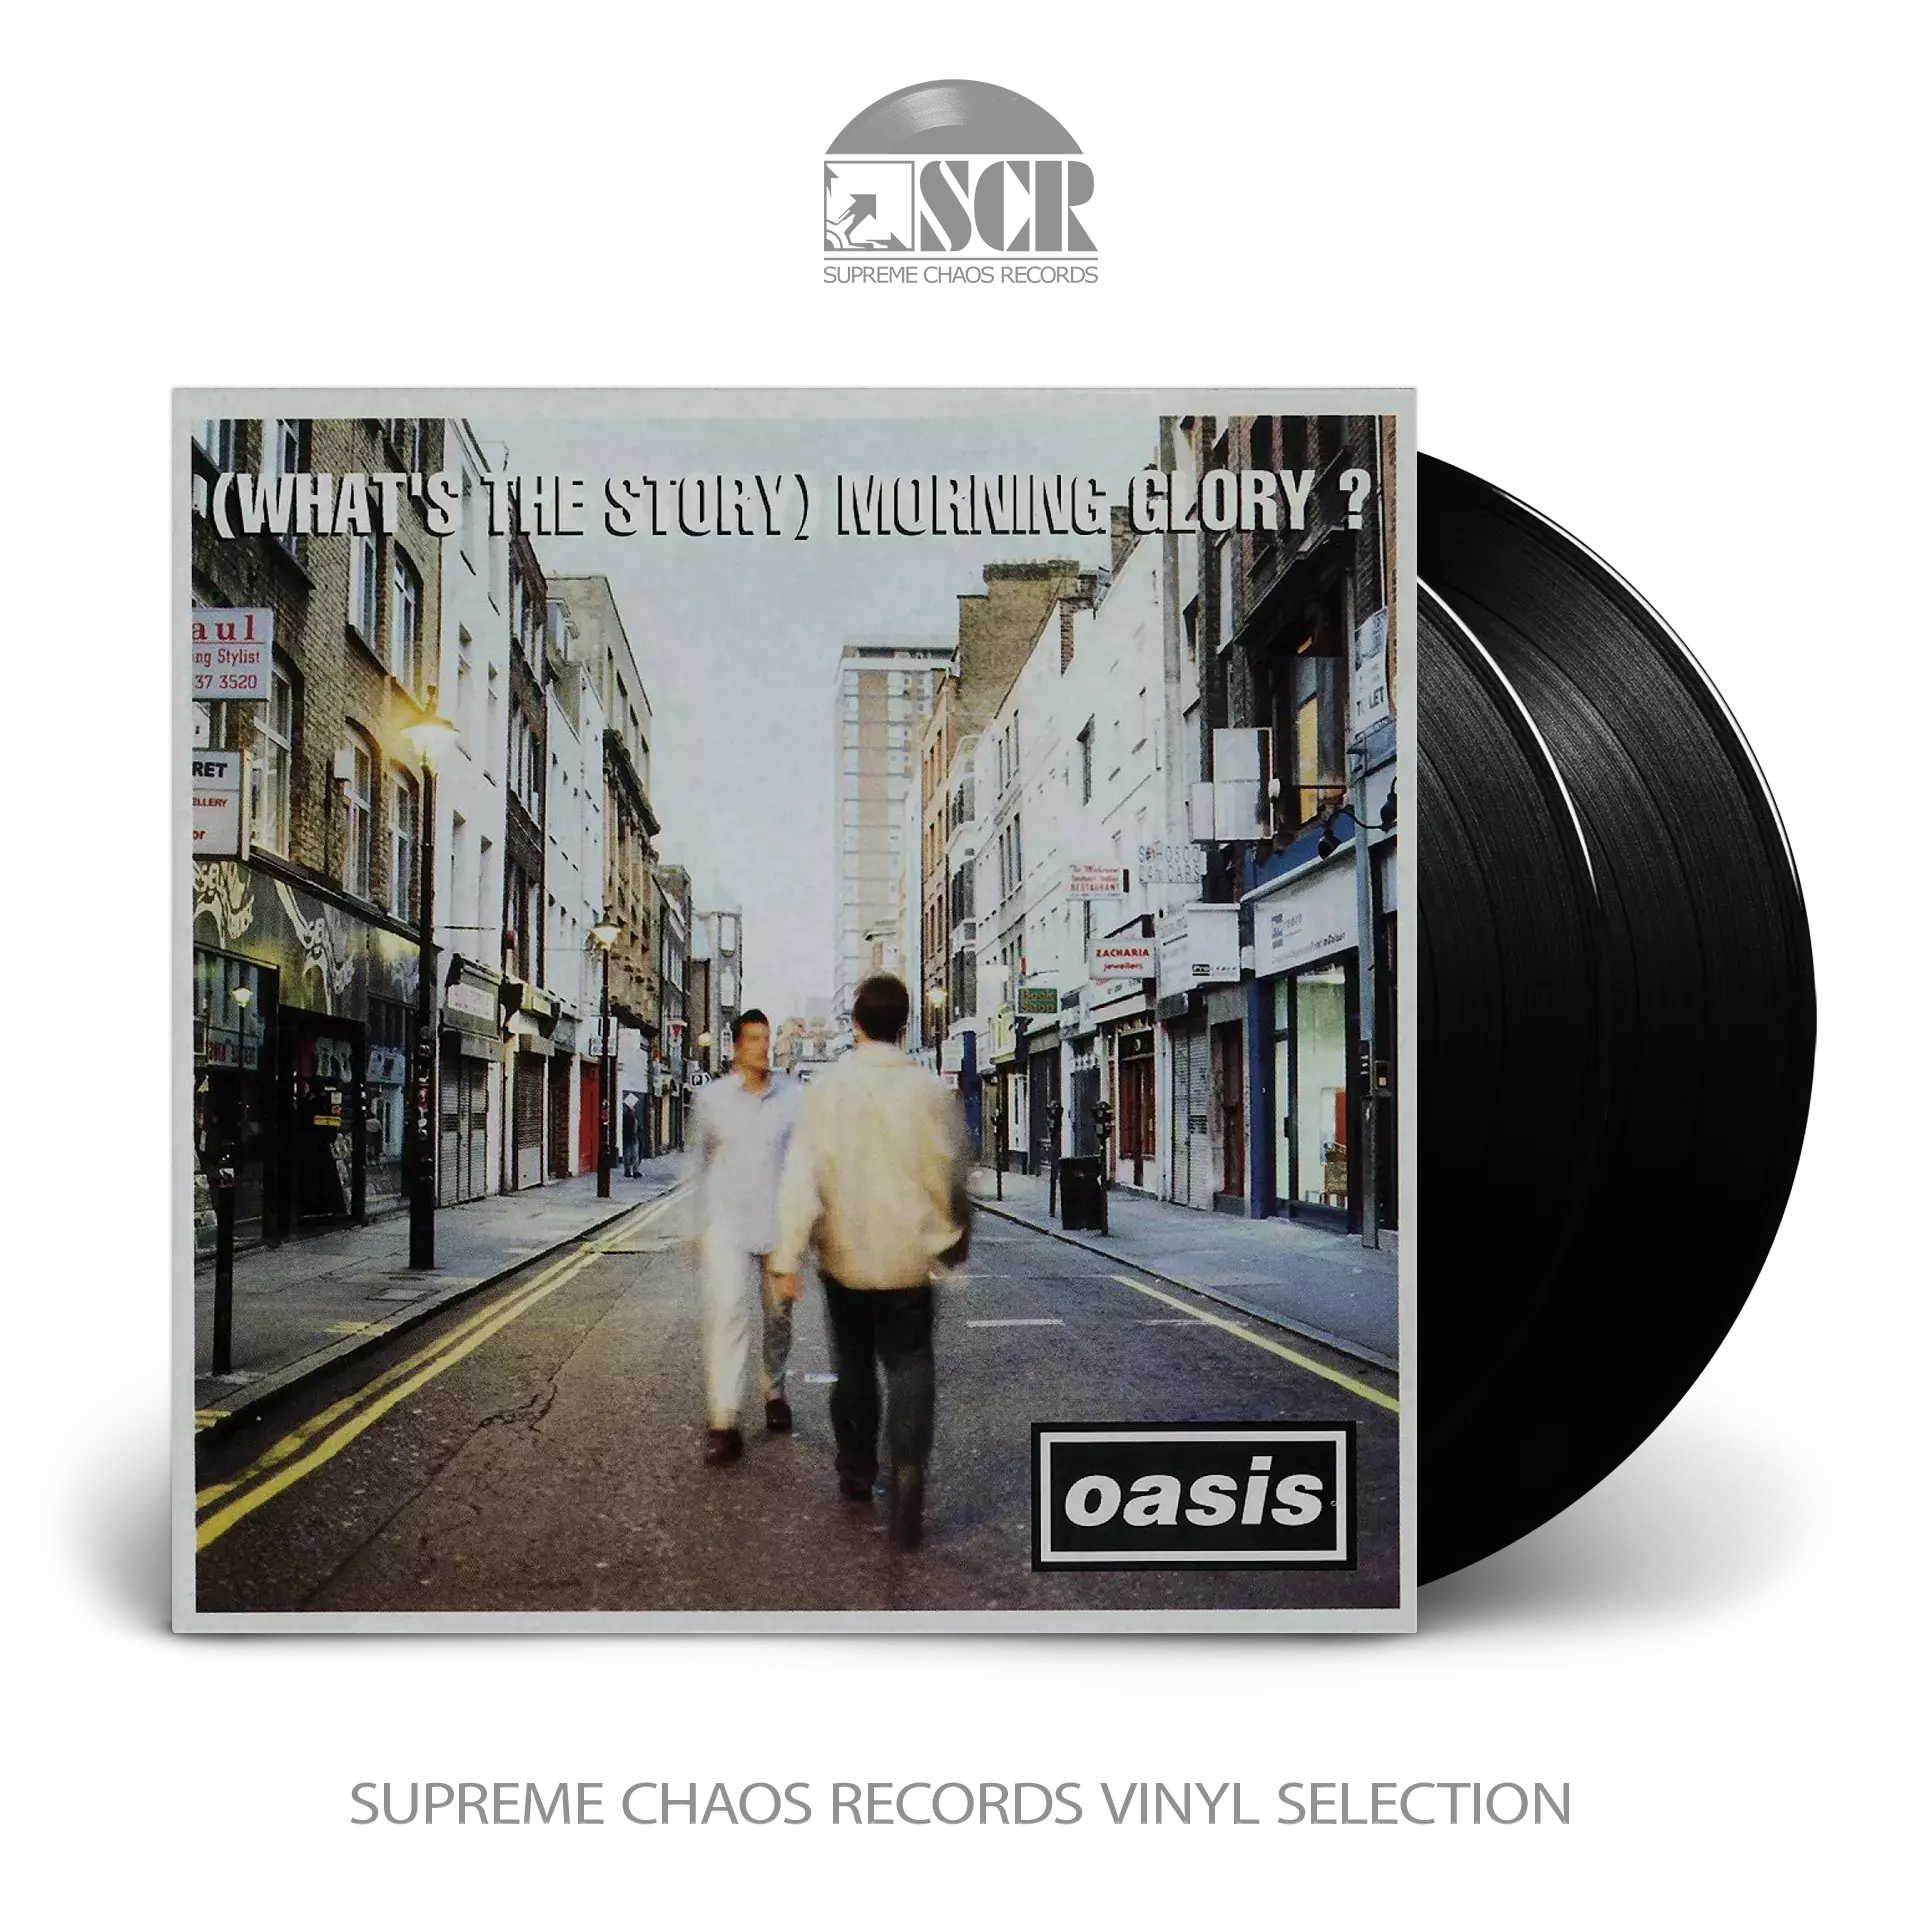 OASIS - What's The Story Morning Glory? (Remastered) [DLP]